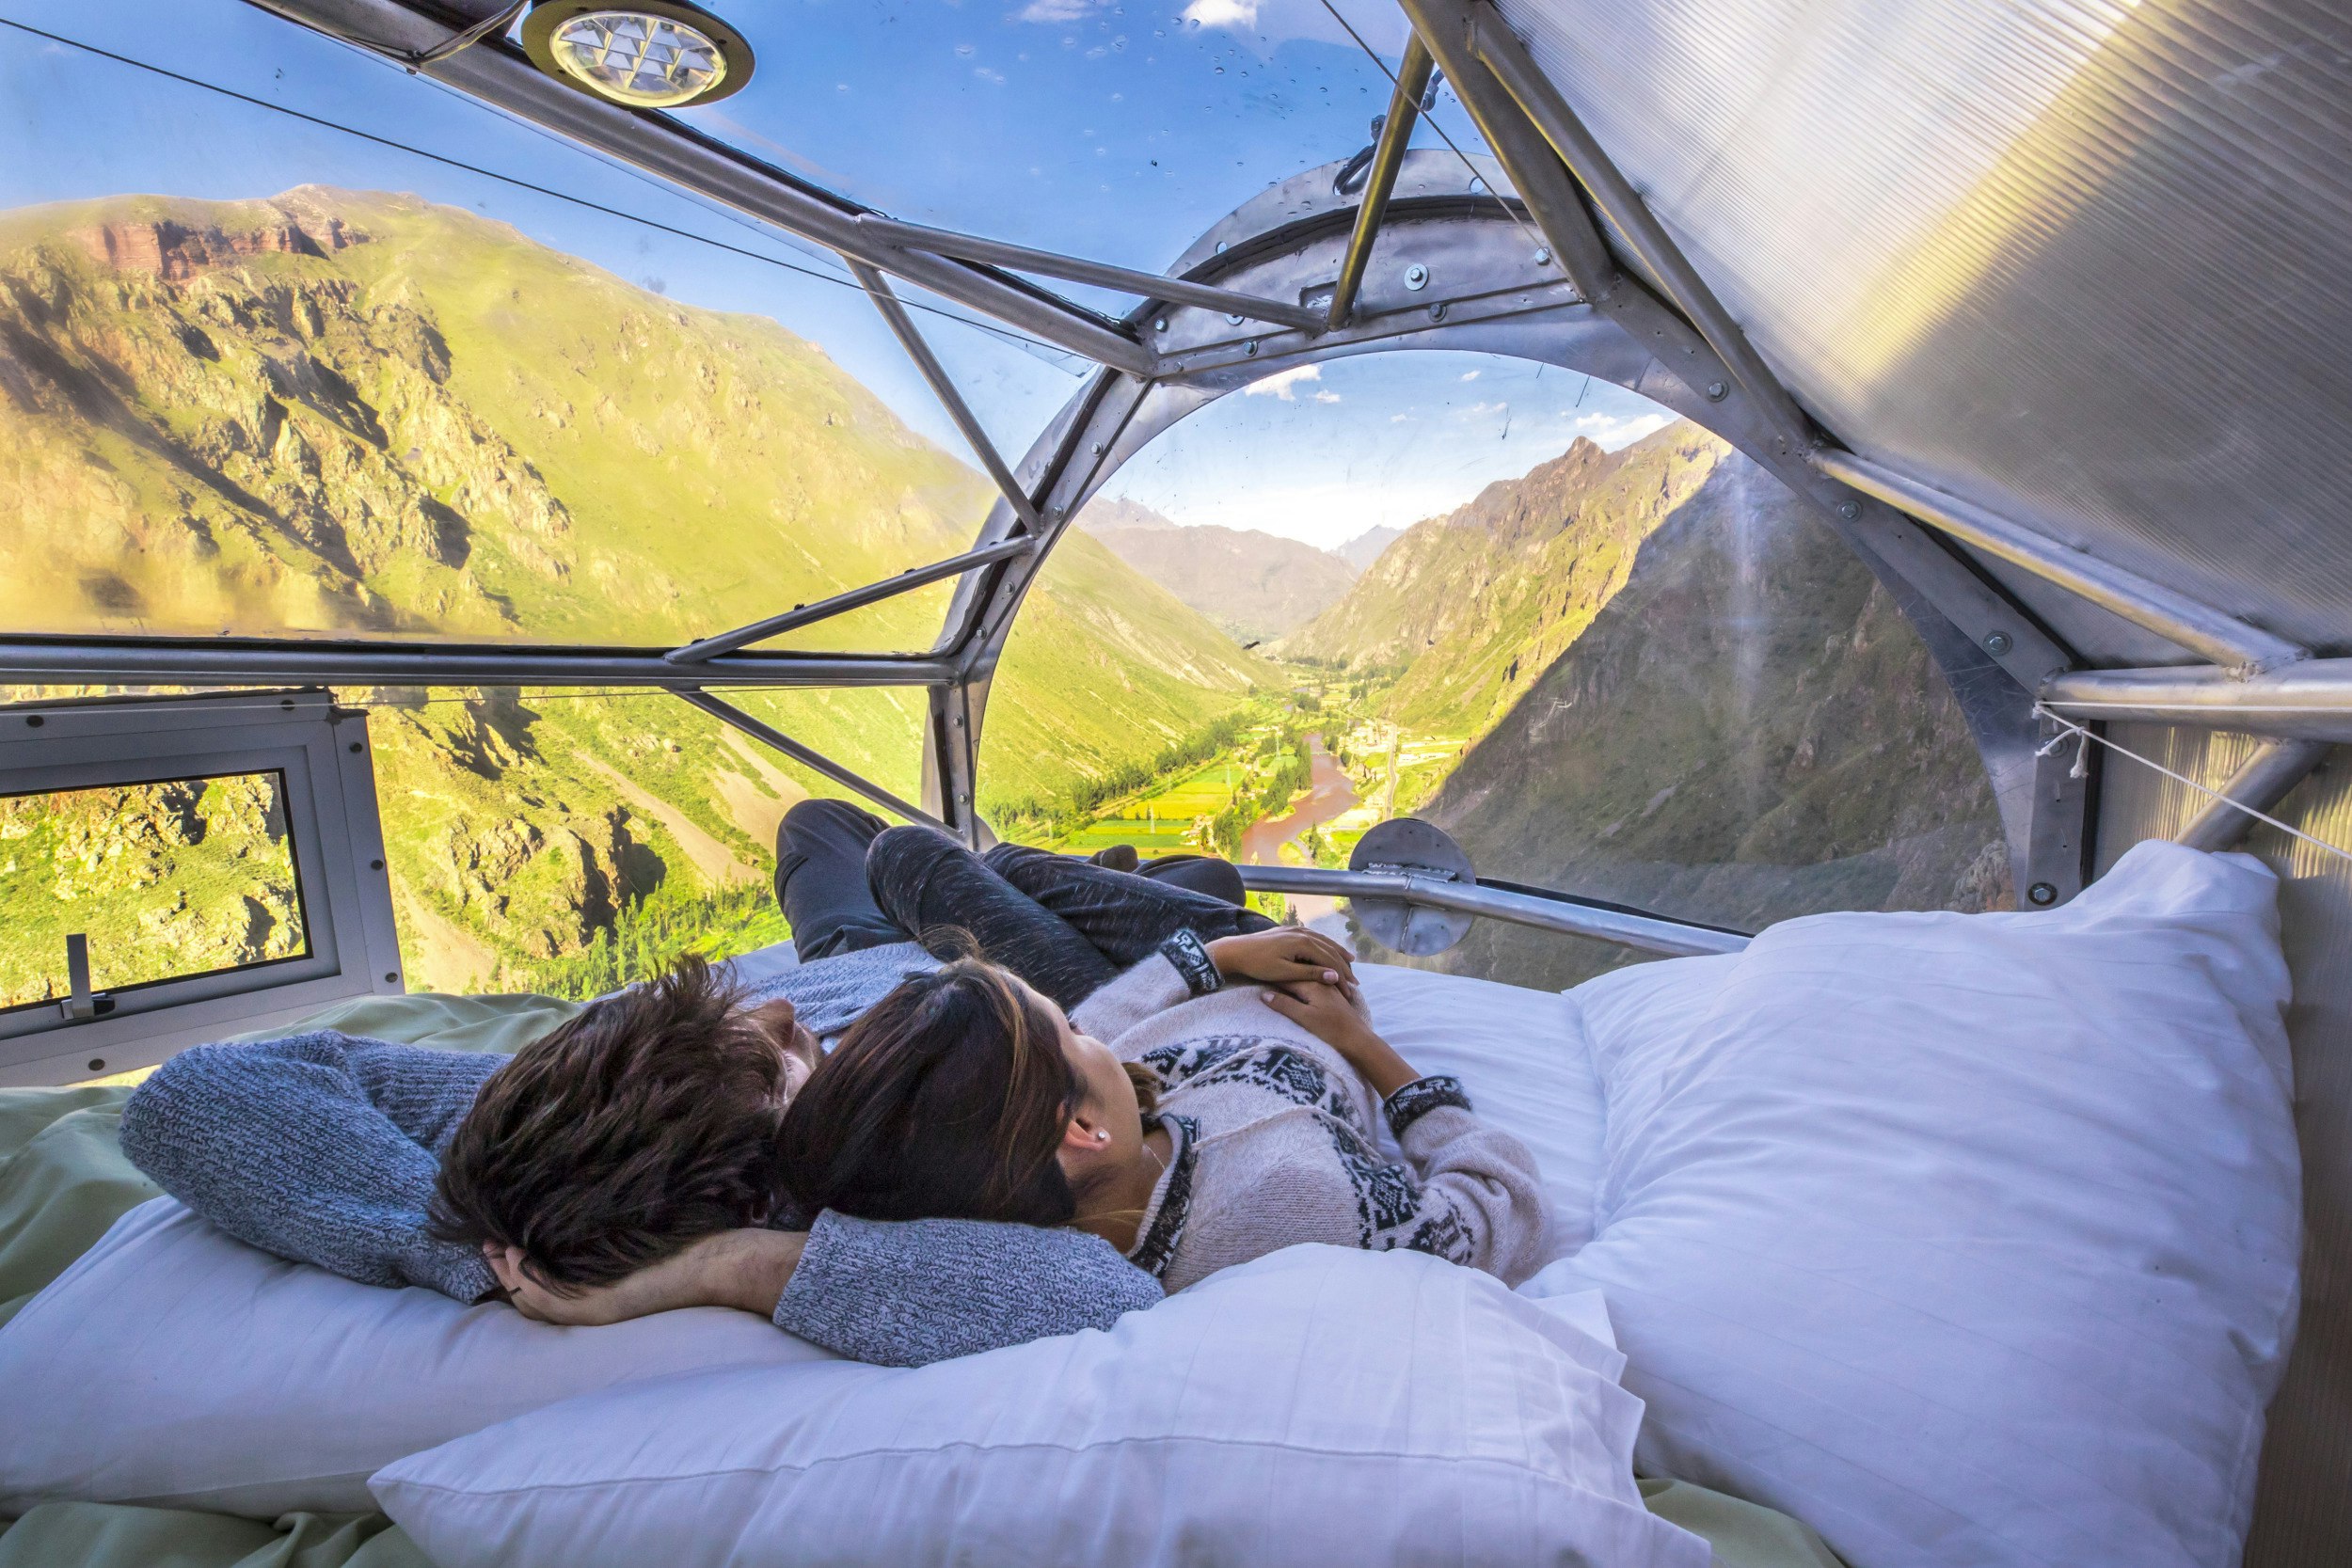 Guests can sleep beneath the stars, perched on the side of a cliff in the Sacred Valley of Peru.